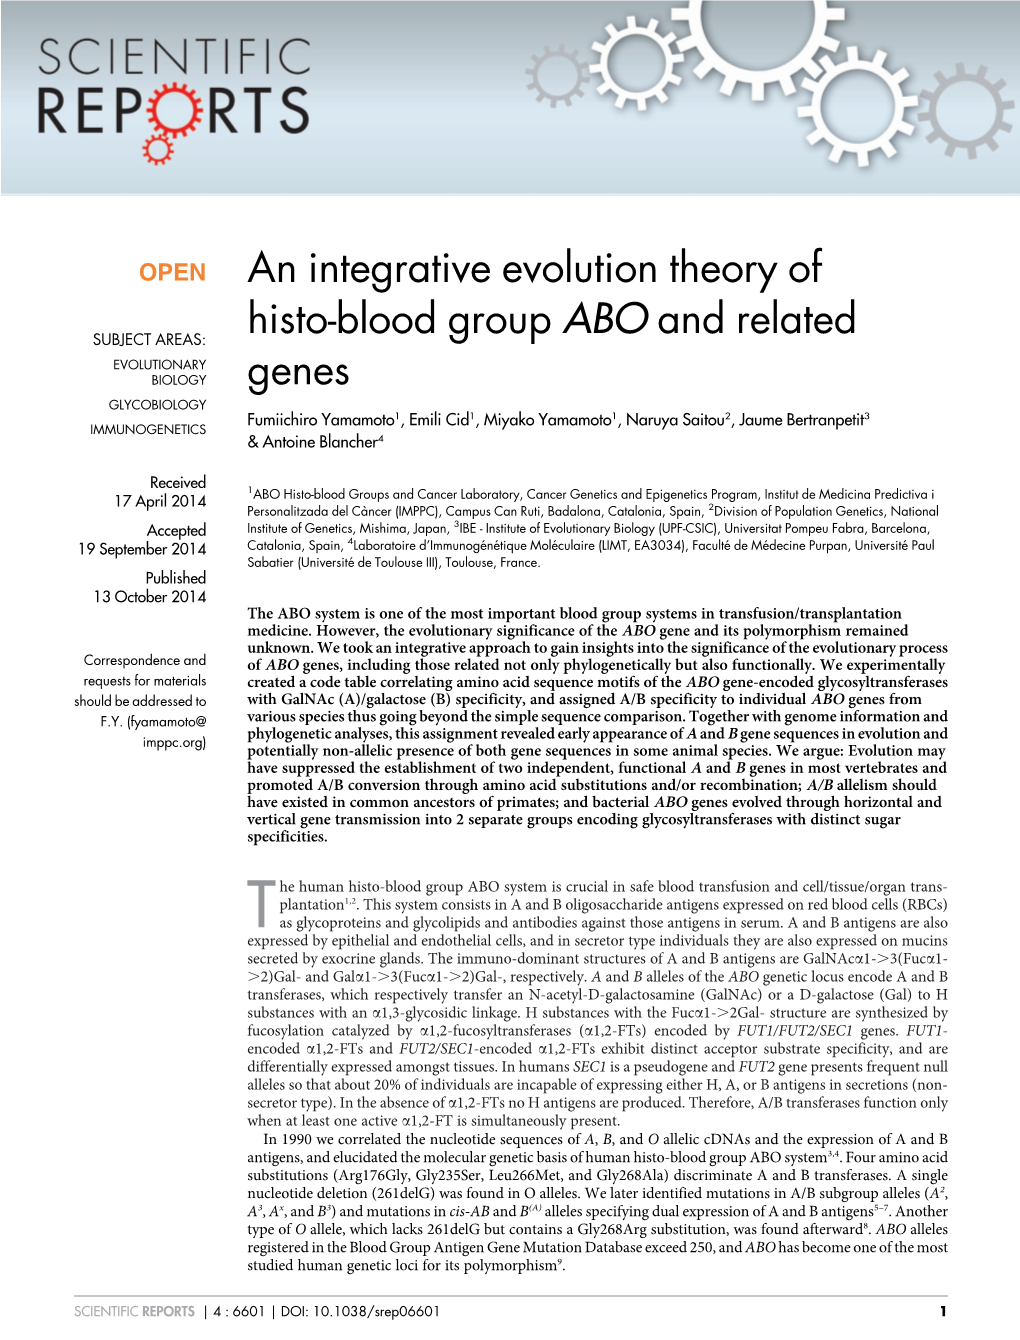 An Integrative Evolution Theory of Histo-Blood Group ABO and Related Genes